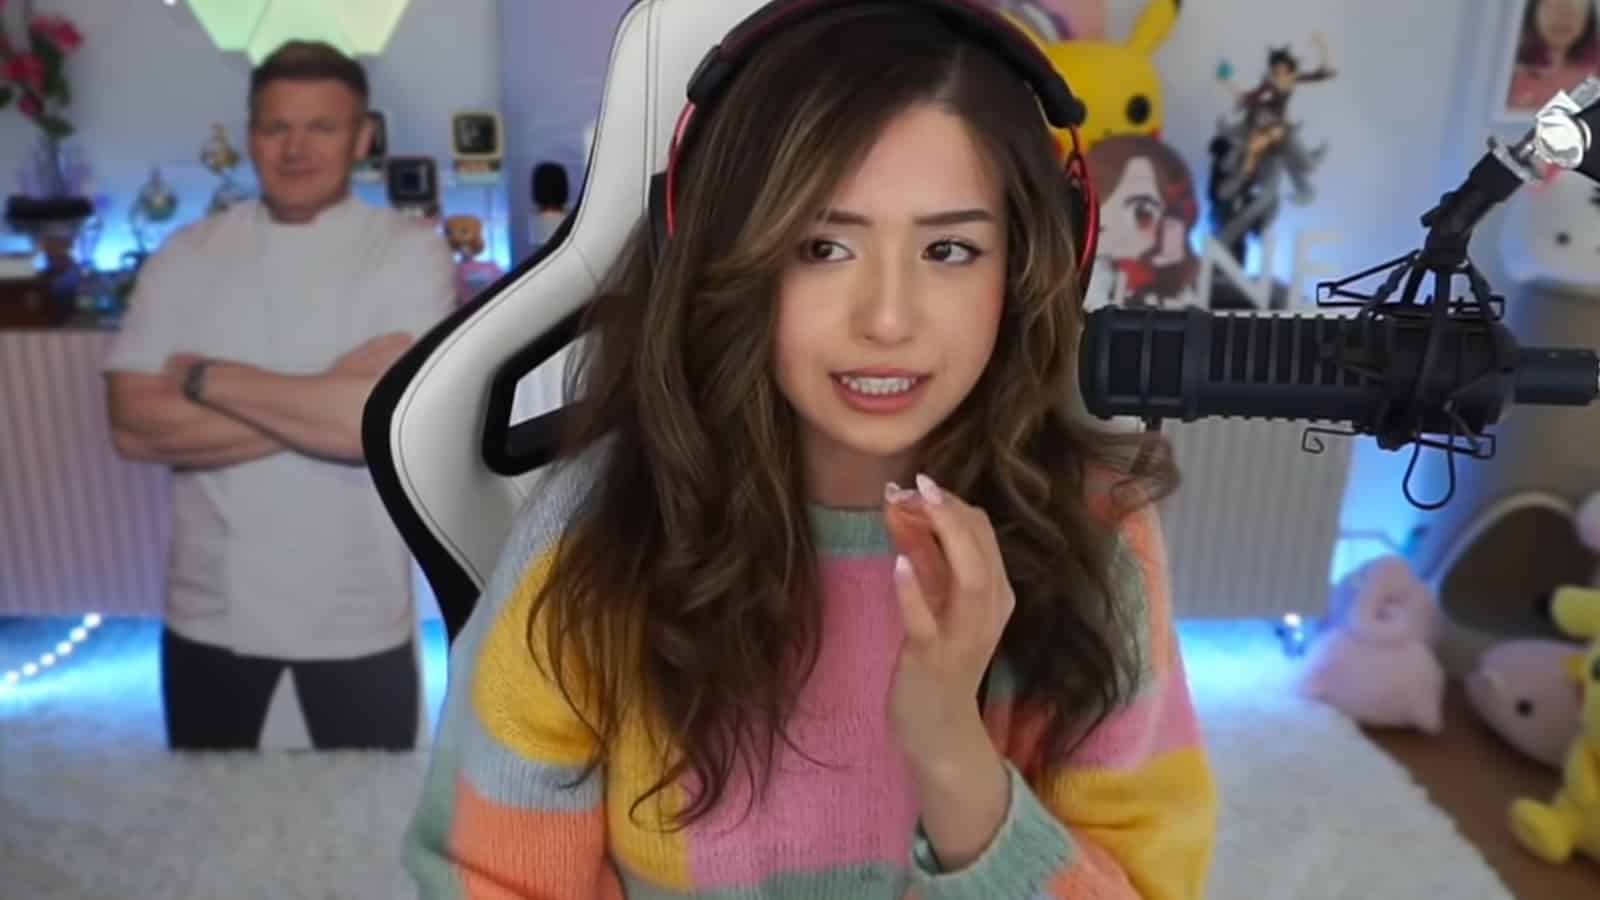 pokimane-explains-why-she-thinks-twitch-ban-for-dmca-tv-show-strikes-is-totally-fair (1)